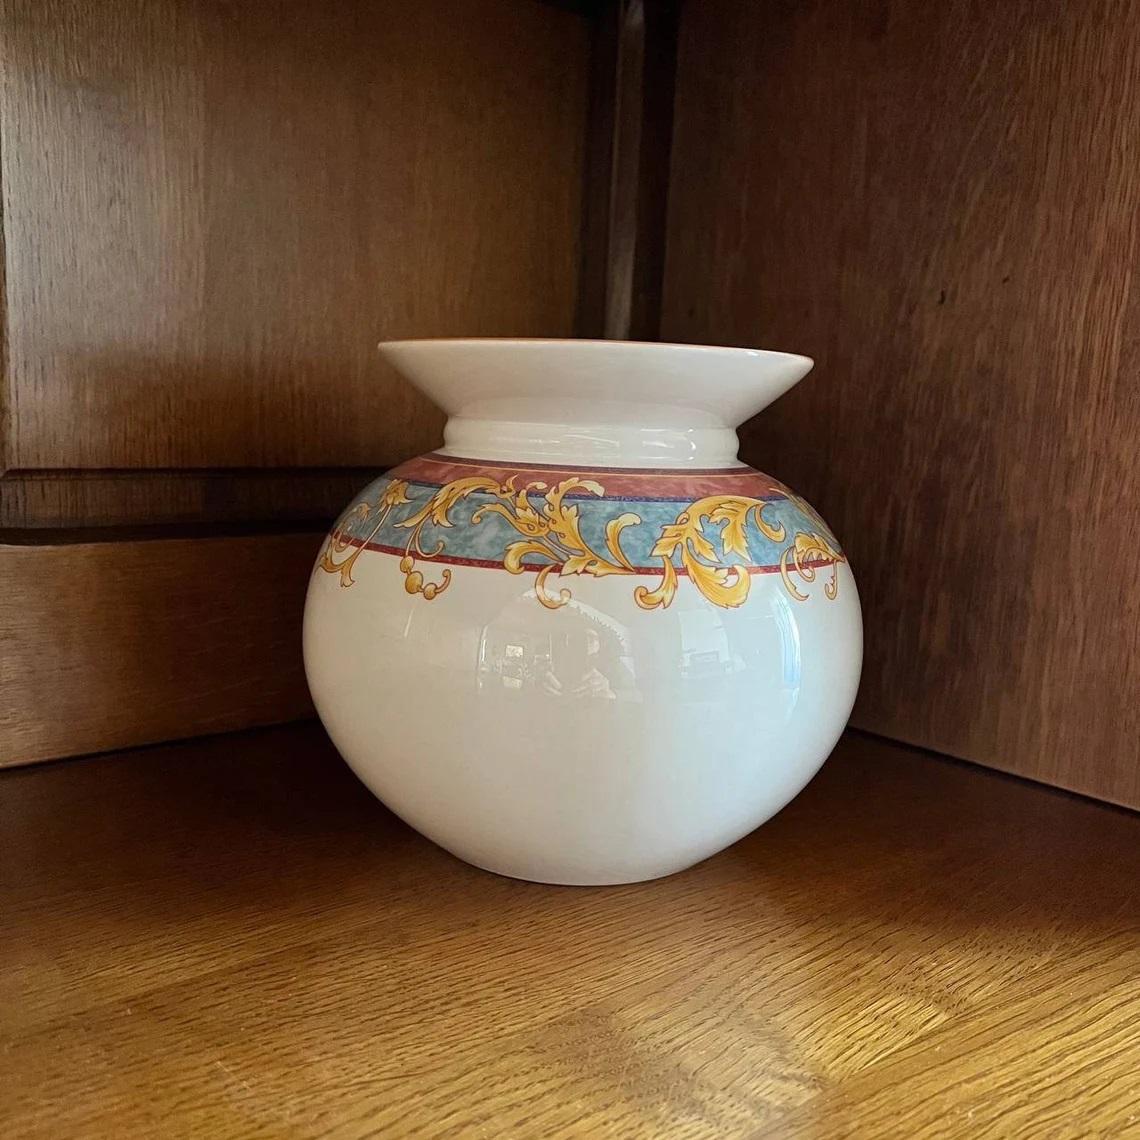 Vintage Villeroy and Boch vase.

A porcelain vase from the excellent Vivaldi collection is an incomparable accessory for the interior of your home. It will fill your bedroom or living room with coziness and beauty. Interesting design meets all the